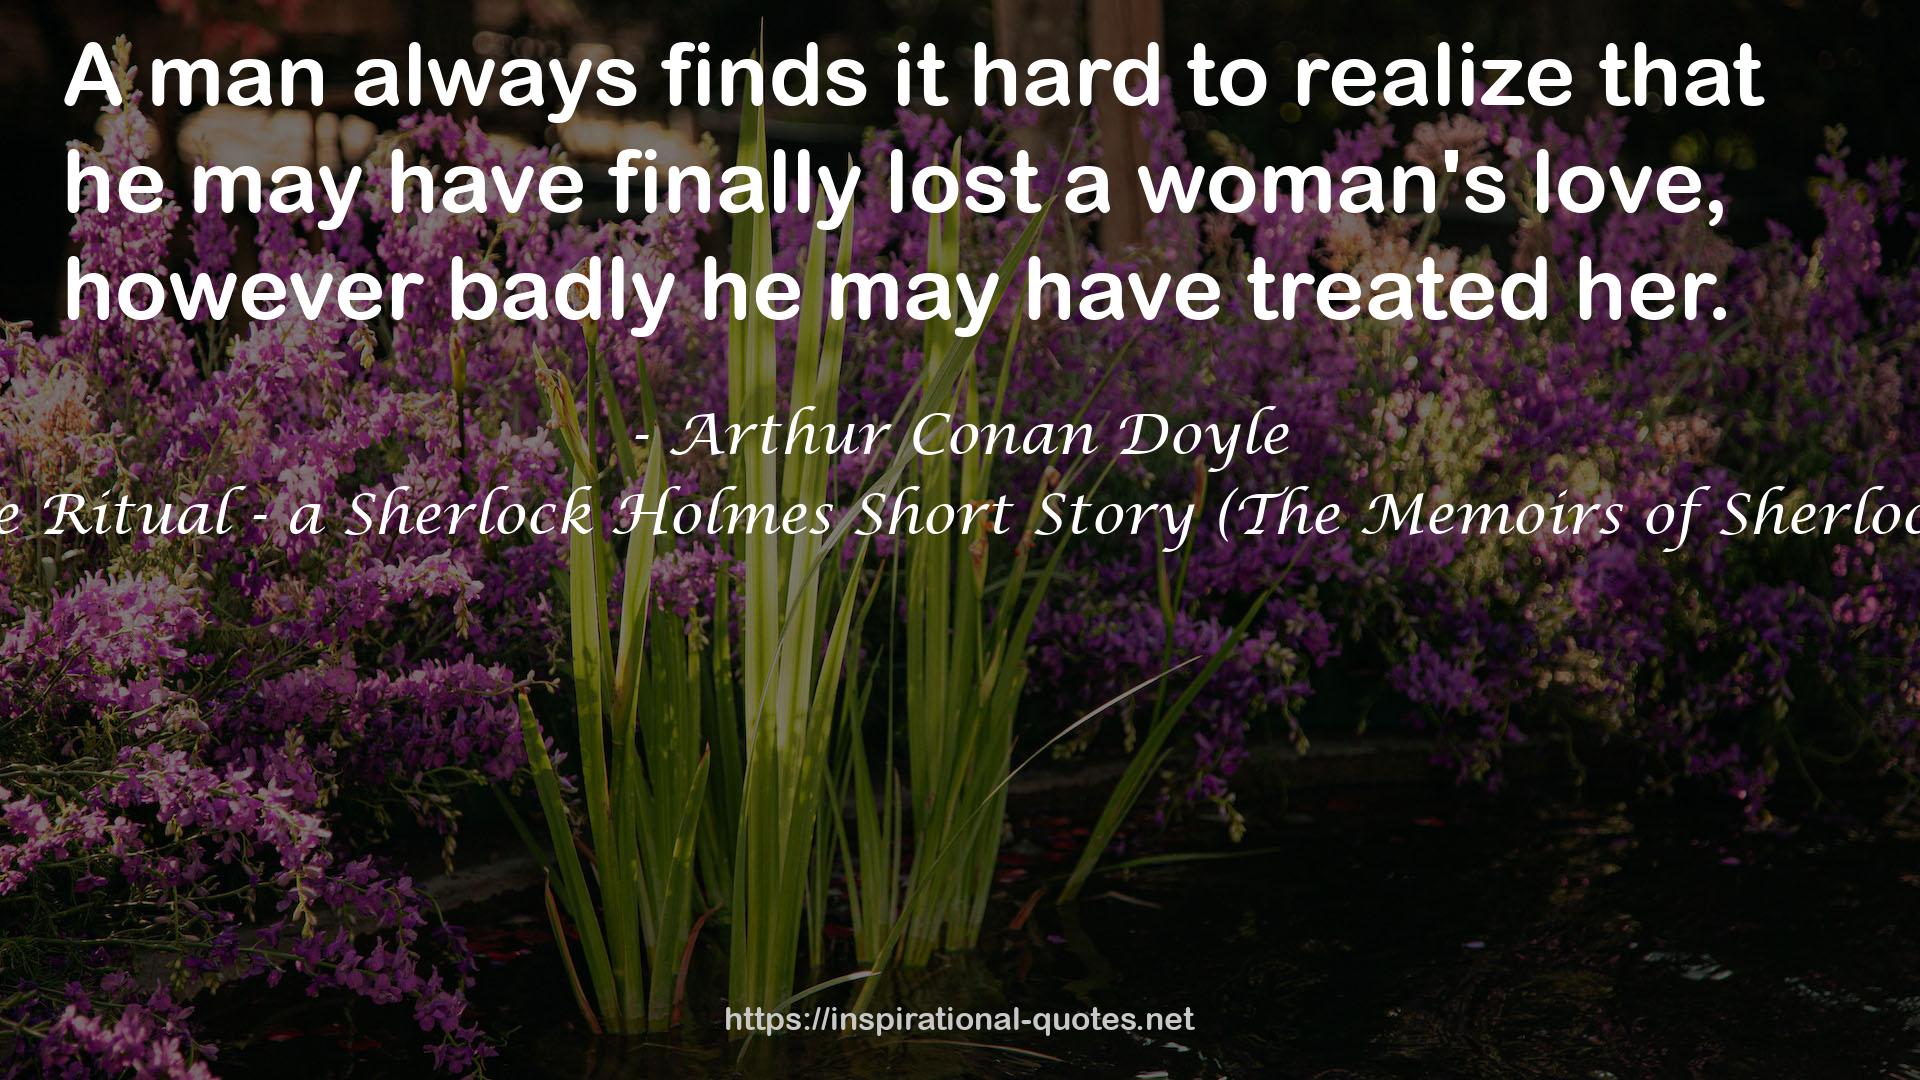 The Musgrave Ritual - a Sherlock Holmes Short Story (The Memoirs of Sherlock Holmes, #5) QUOTES